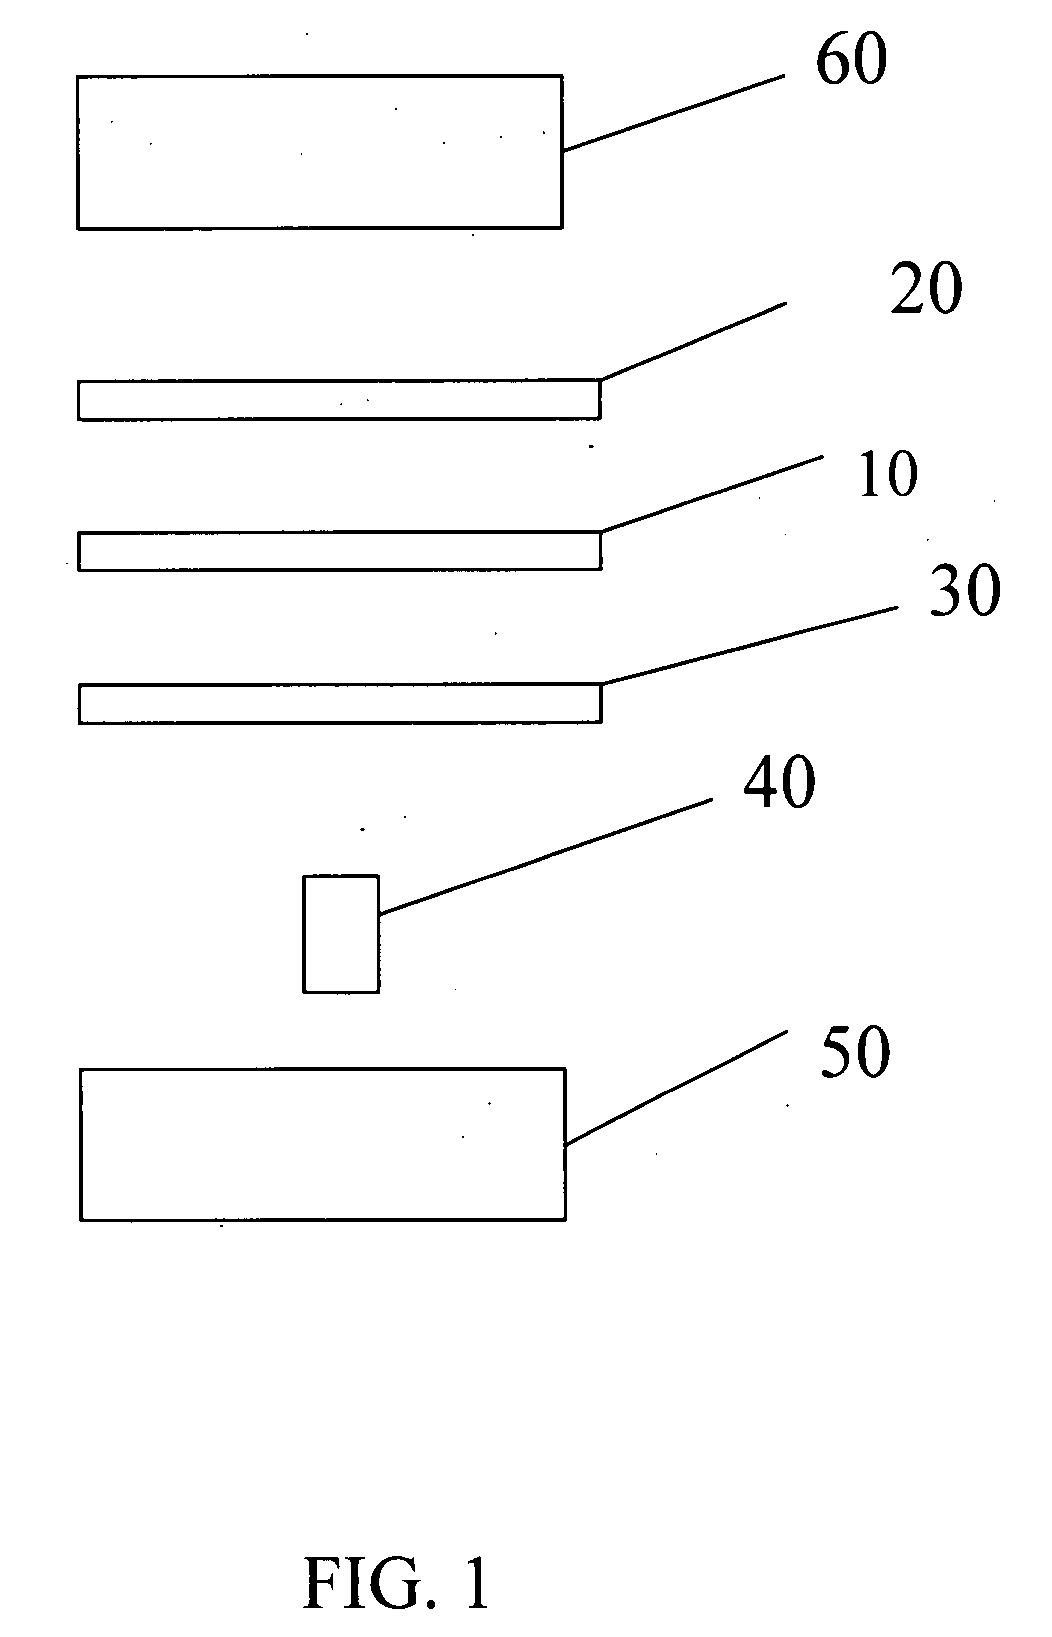 Fluorescence detector, filter device and related methods